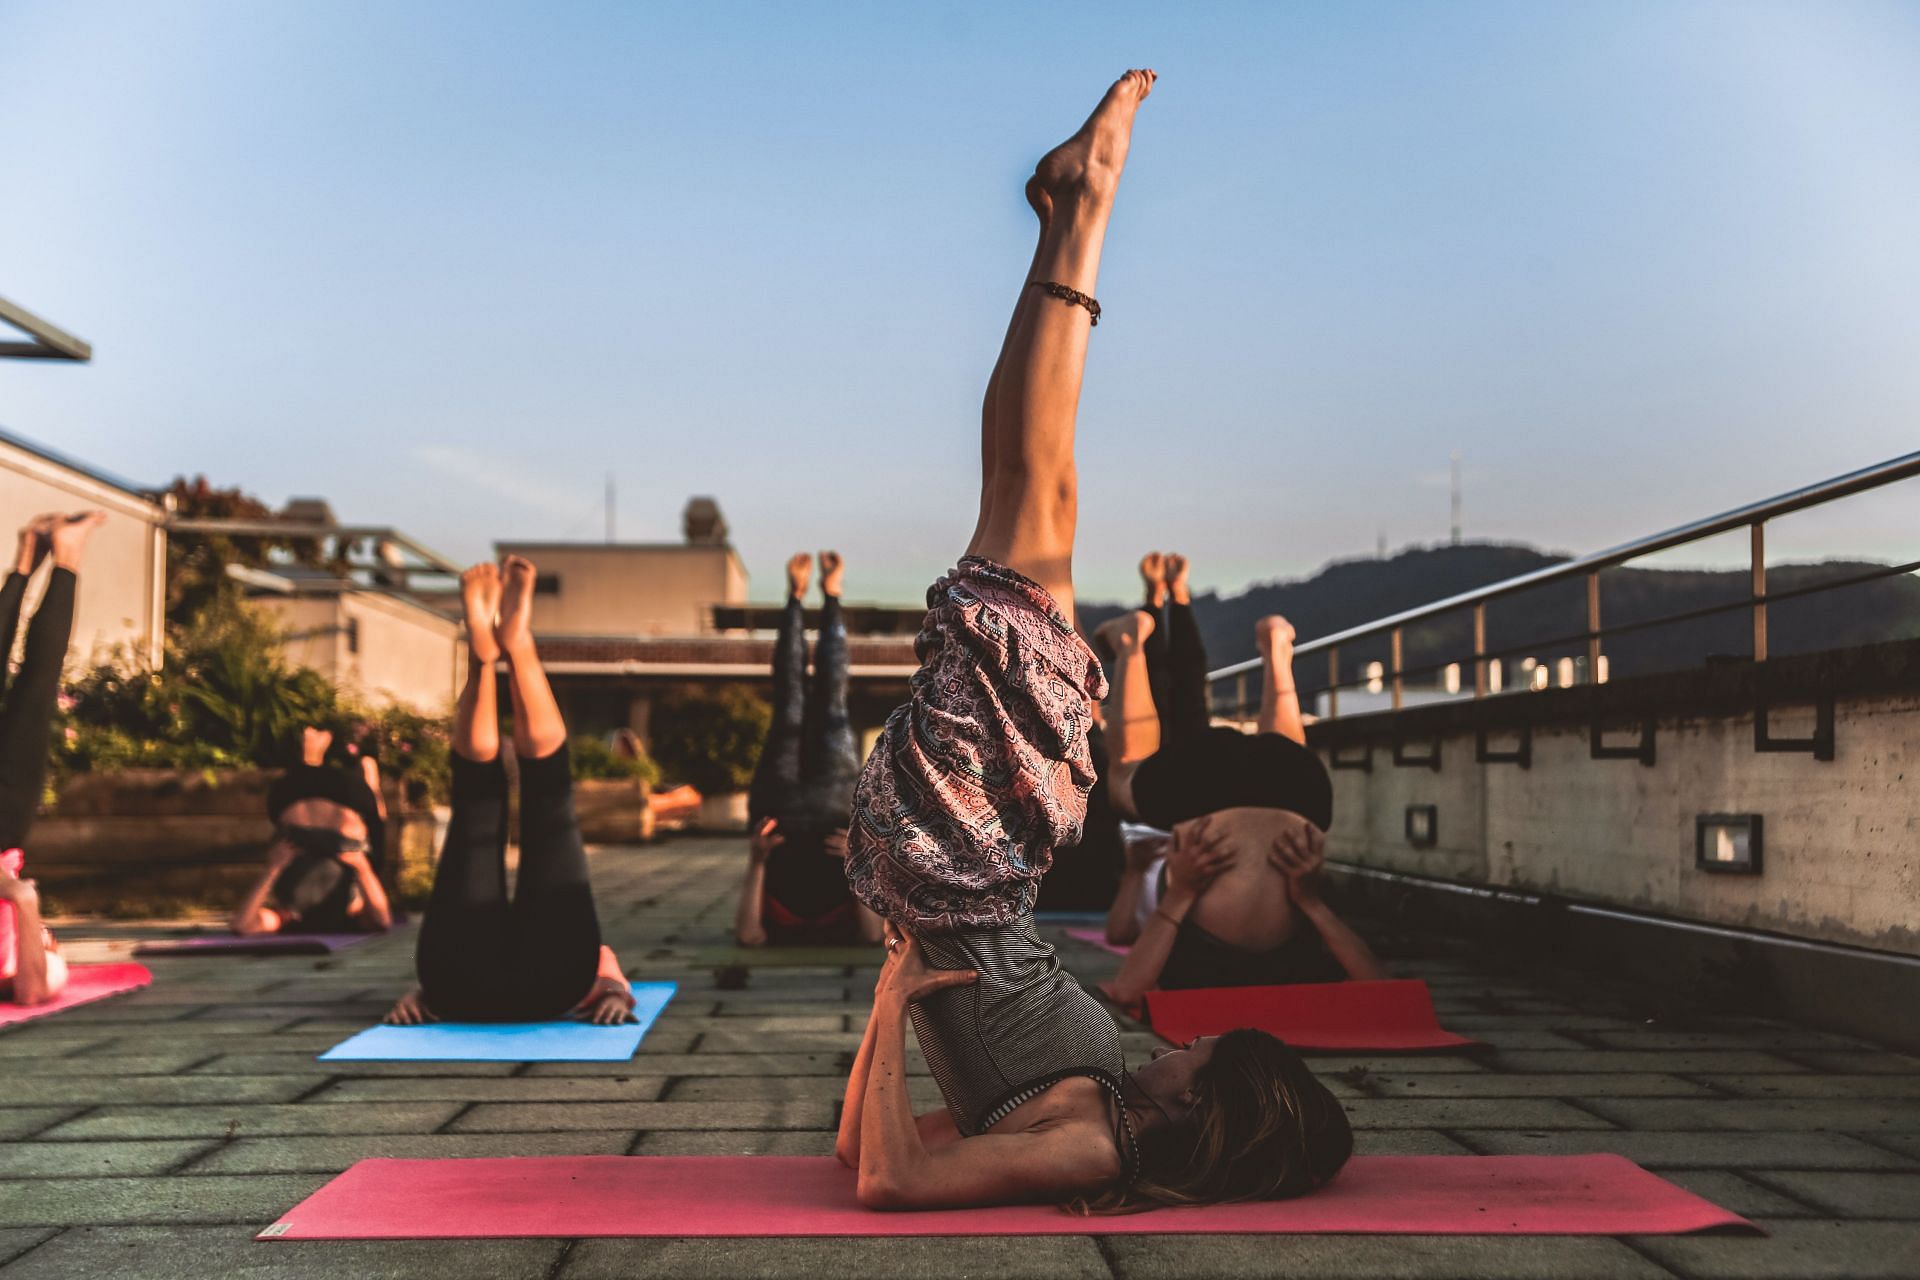 Yoga strengthens the core and tones the body. (Image via Pexels/Amin Sujan)